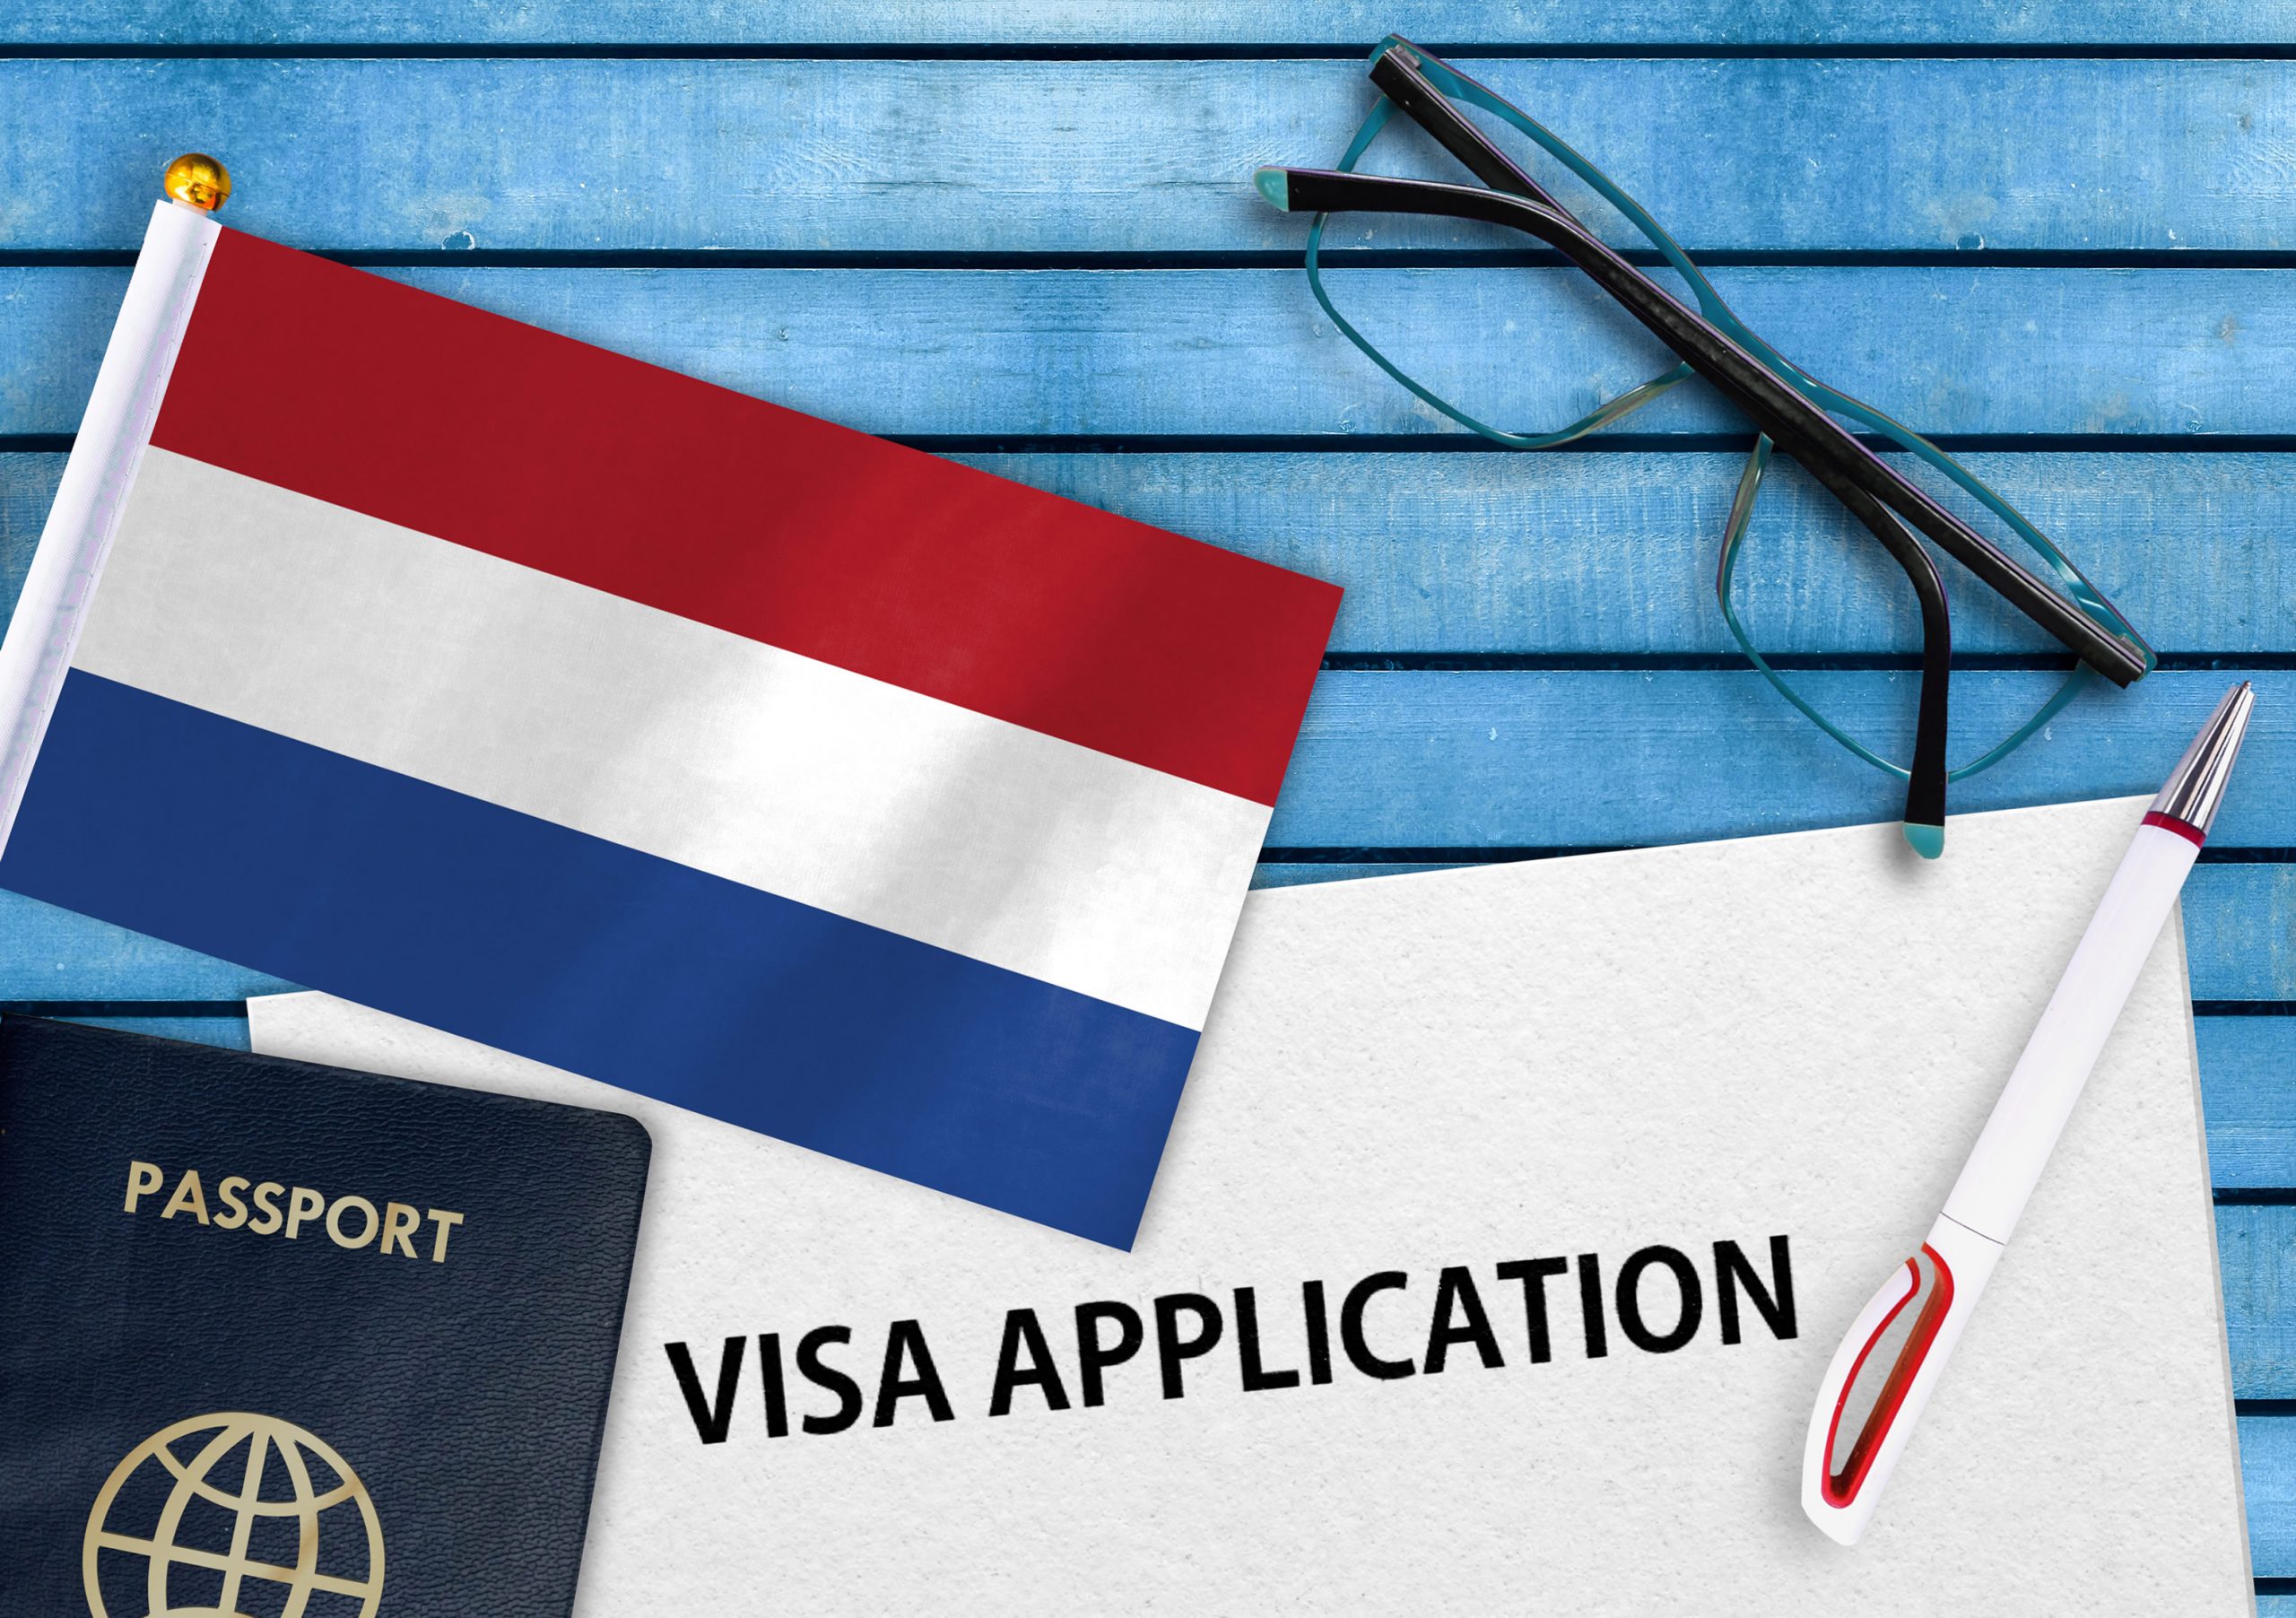 netherlands visa kuwait, What are the steps to obtain a schengen visa kuwait netherlands?